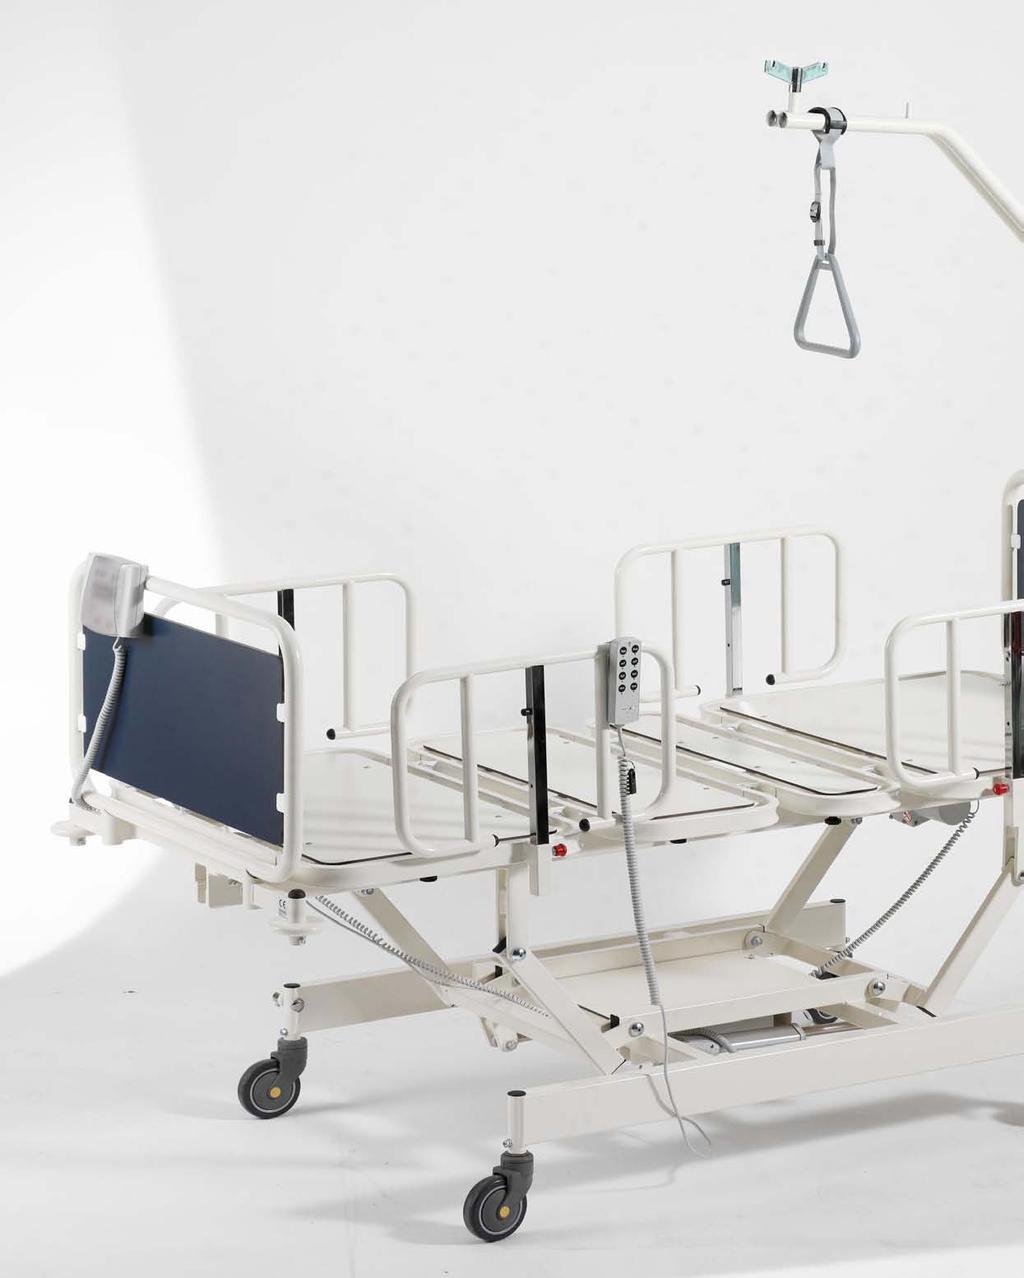 Our Bed Frames Pavillion Medical has developed and built equipment to meet the daily needs of clinical users while providing optimum patient dignity, mobility and care.